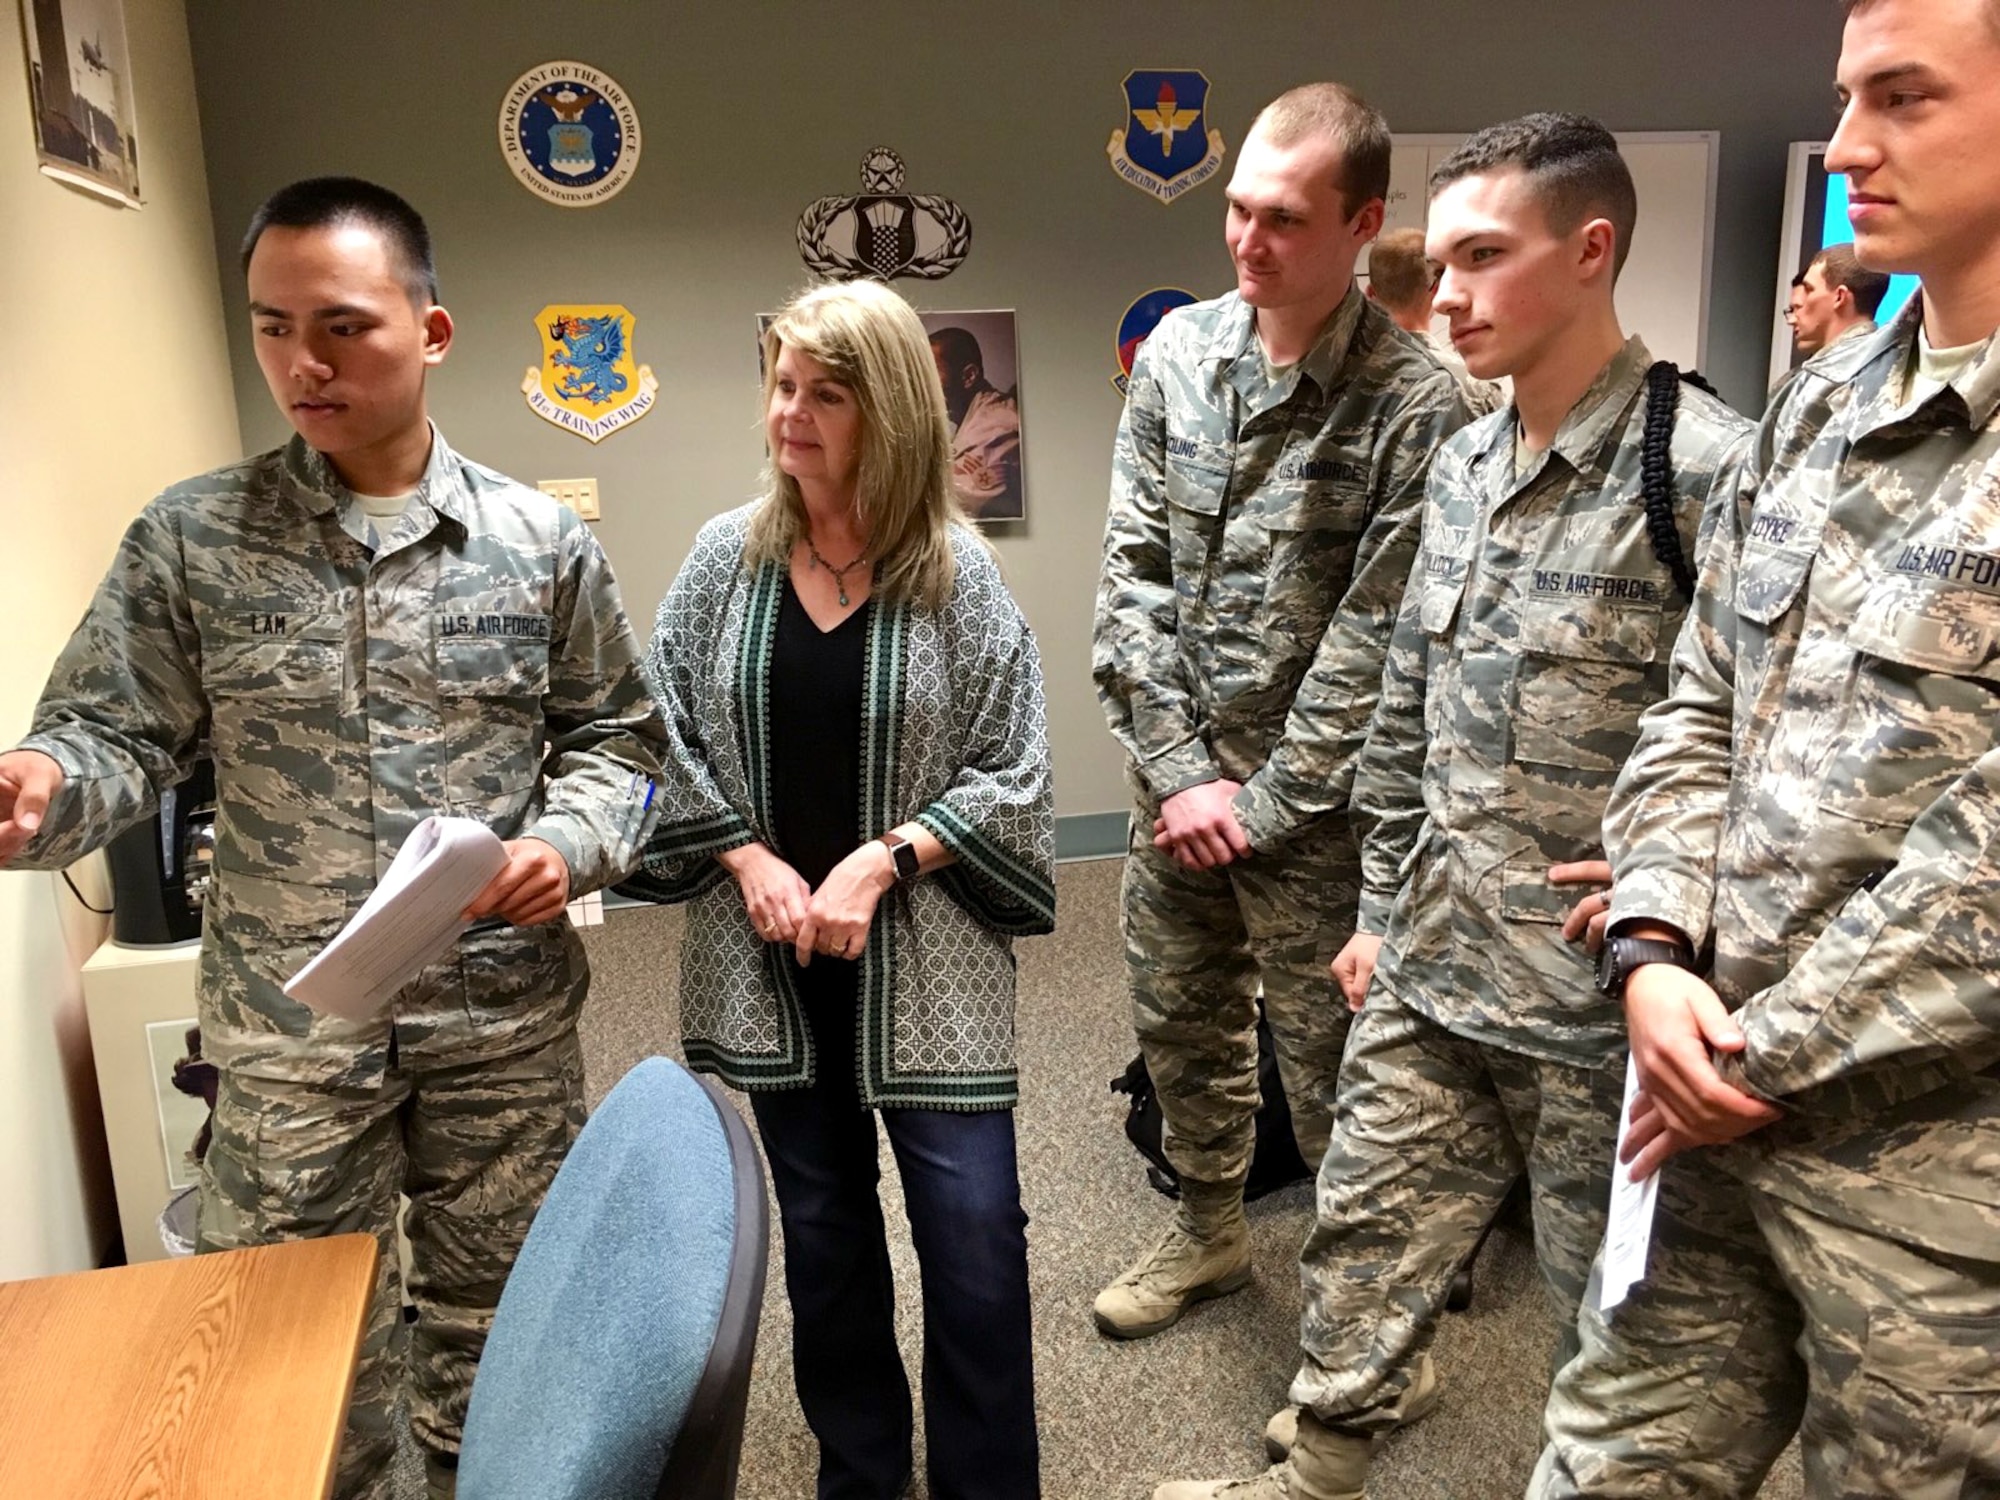 Katherine Chowdhary, 334th Training Squadron instructor, observes presentations given by 334th TRS air traffic control students at Keesler Air Force Base, Mississippi Jan. 24, 2019. Chowdhary’s class is the first to incorporate an Active Learning Environment in the ATC course and throughout the course she ensures her students are given the opportunity to understand the course material fully. The 81st Training Group encourages all instructors to implement innovative techniques to better develop Mach-21 Airmen. (U.S. Air Force photo by Airman 1st Class Kimberly L. Mueller)